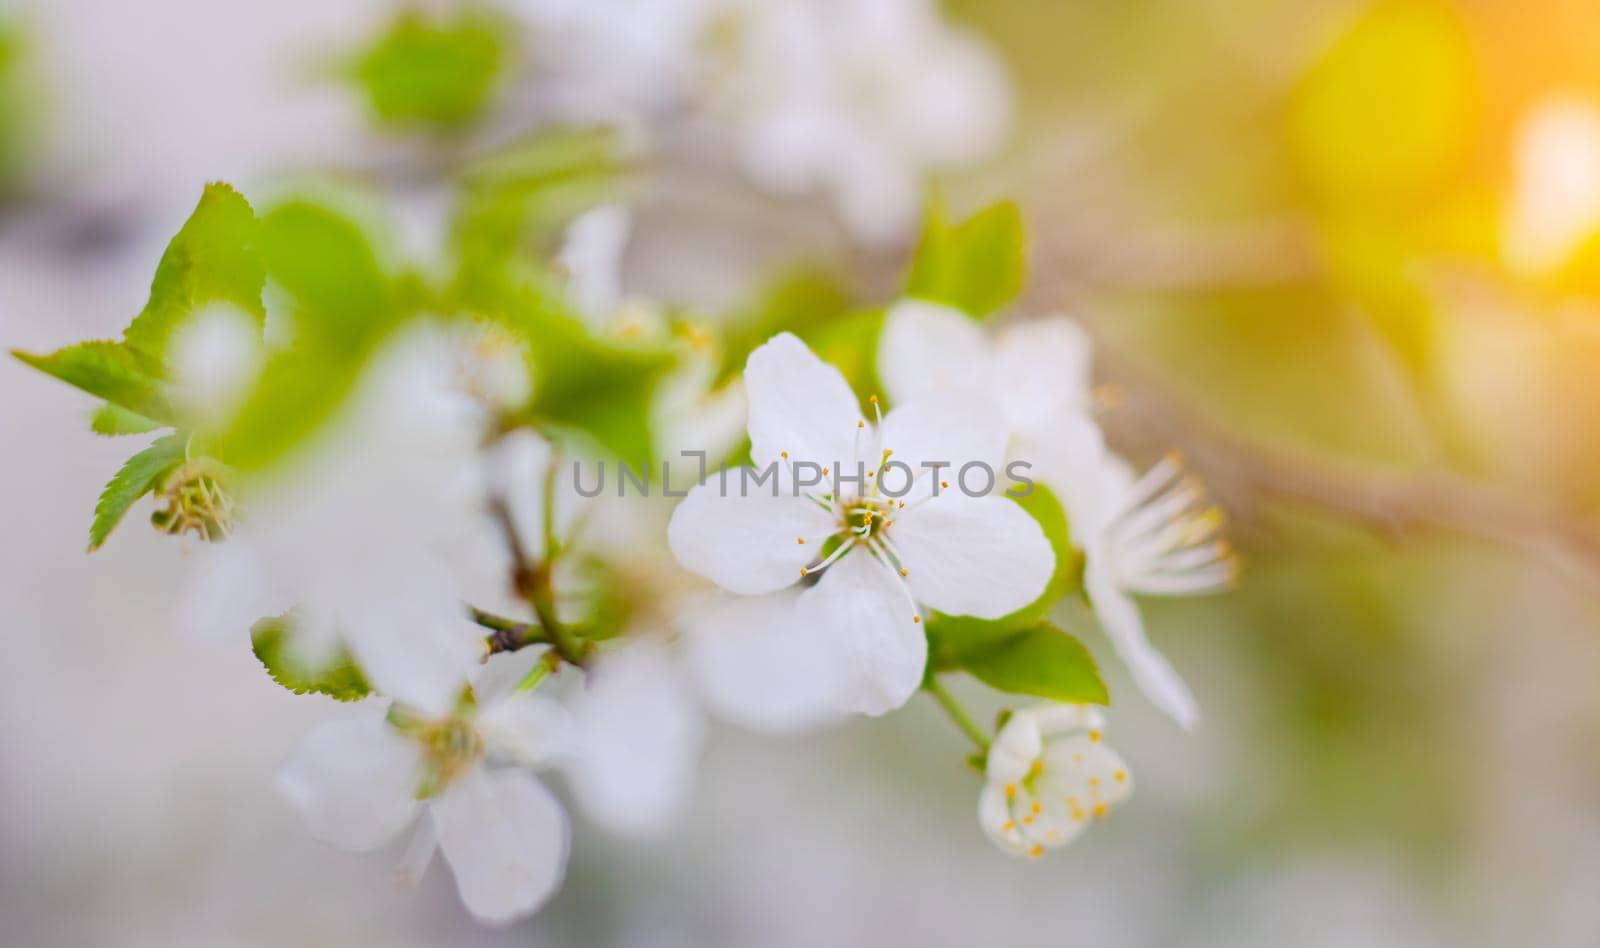 Beautiful branch of a blossoming cherry. Floral background. Spring flowers. Pistils and stamens. An article about flowering garden trees.